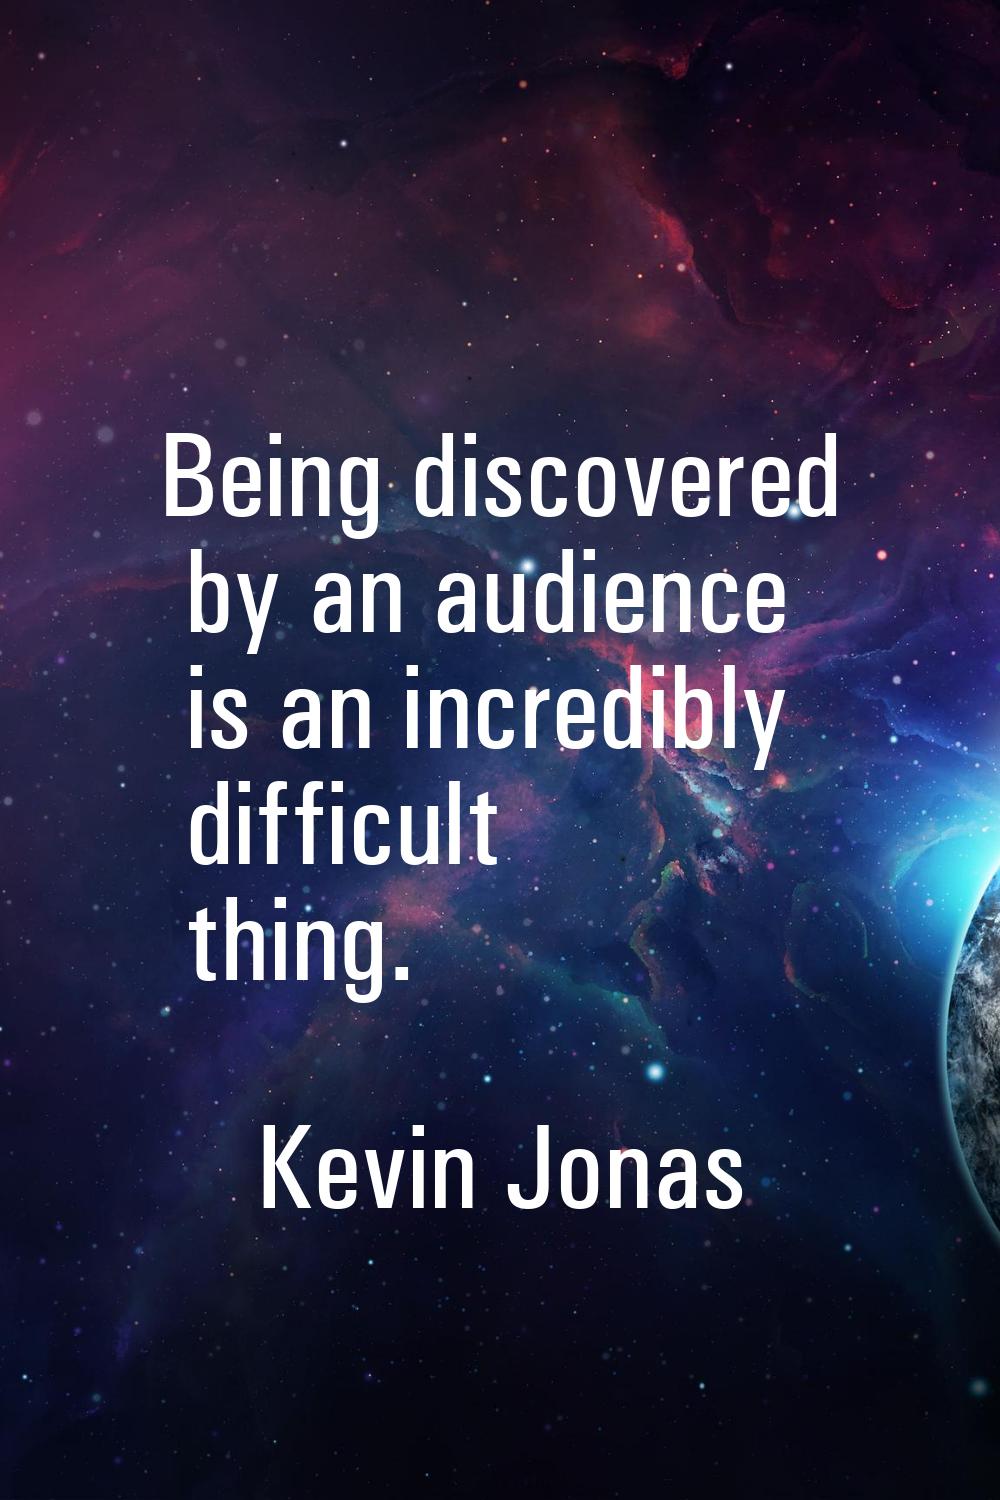 Being discovered by an audience is an incredibly difficult thing.